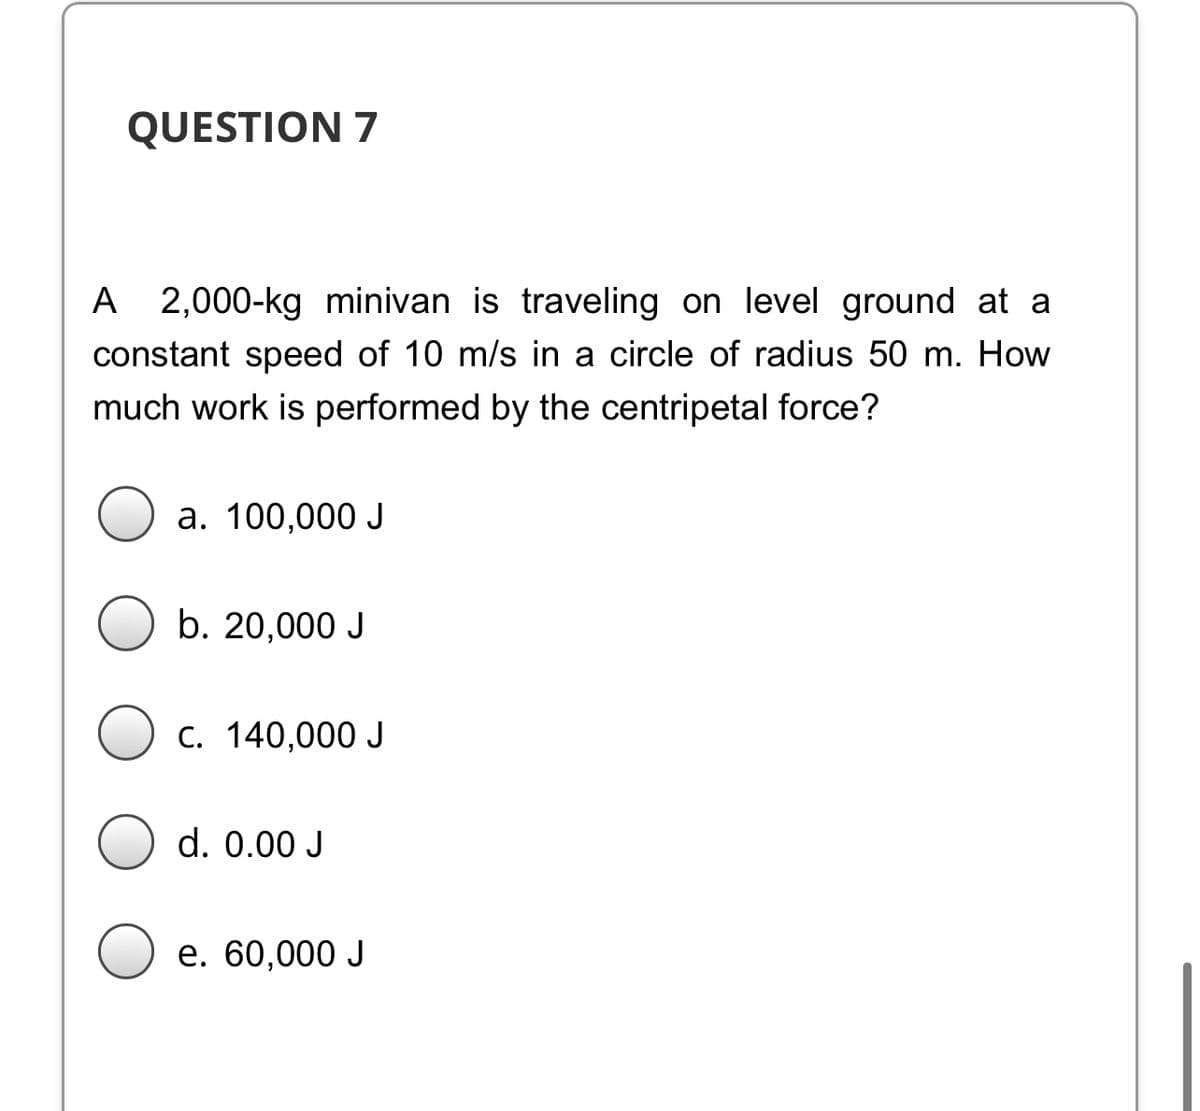 QUESTION 7
A
2,000-kg minivan is traveling on level ground at a
constant speed of 10 m/s in a circle of radius 50 m. How
much work is performed by the centripetal force?
a. 100,000 J
b. 20,000 J
C. 140,000 J
d. 0.00 J
е. 60,000 J
